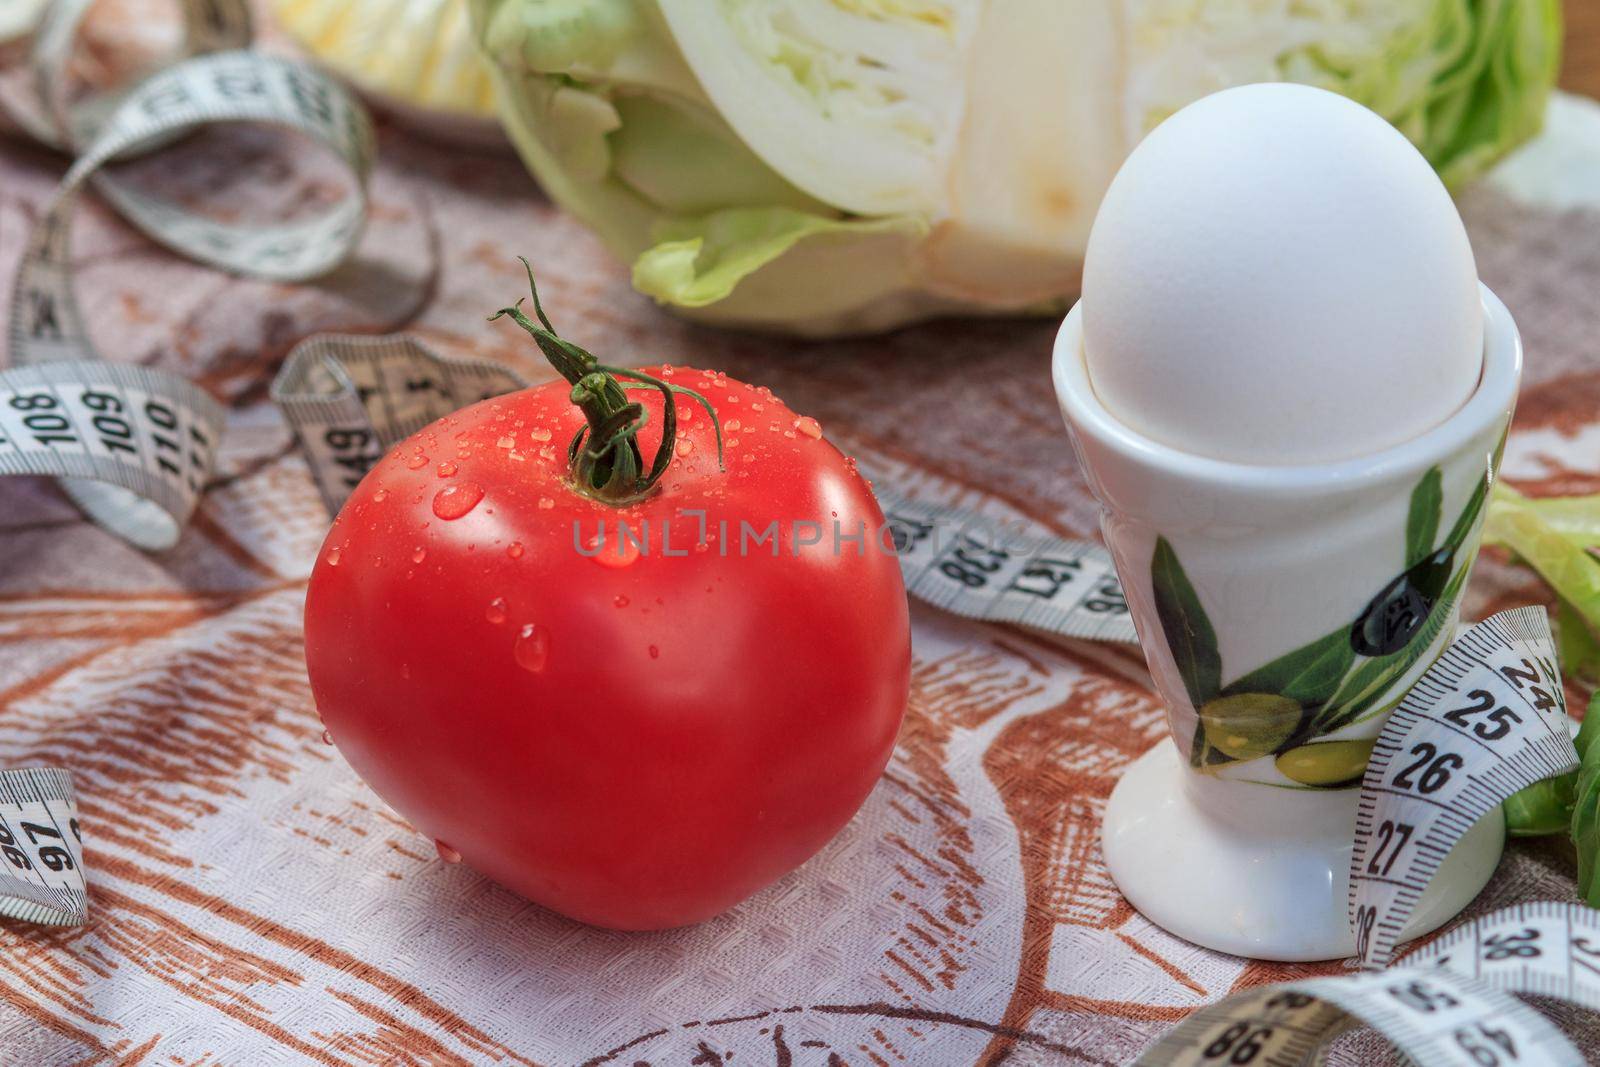 Nice red tomato, egg, cabbage and ruler on the table